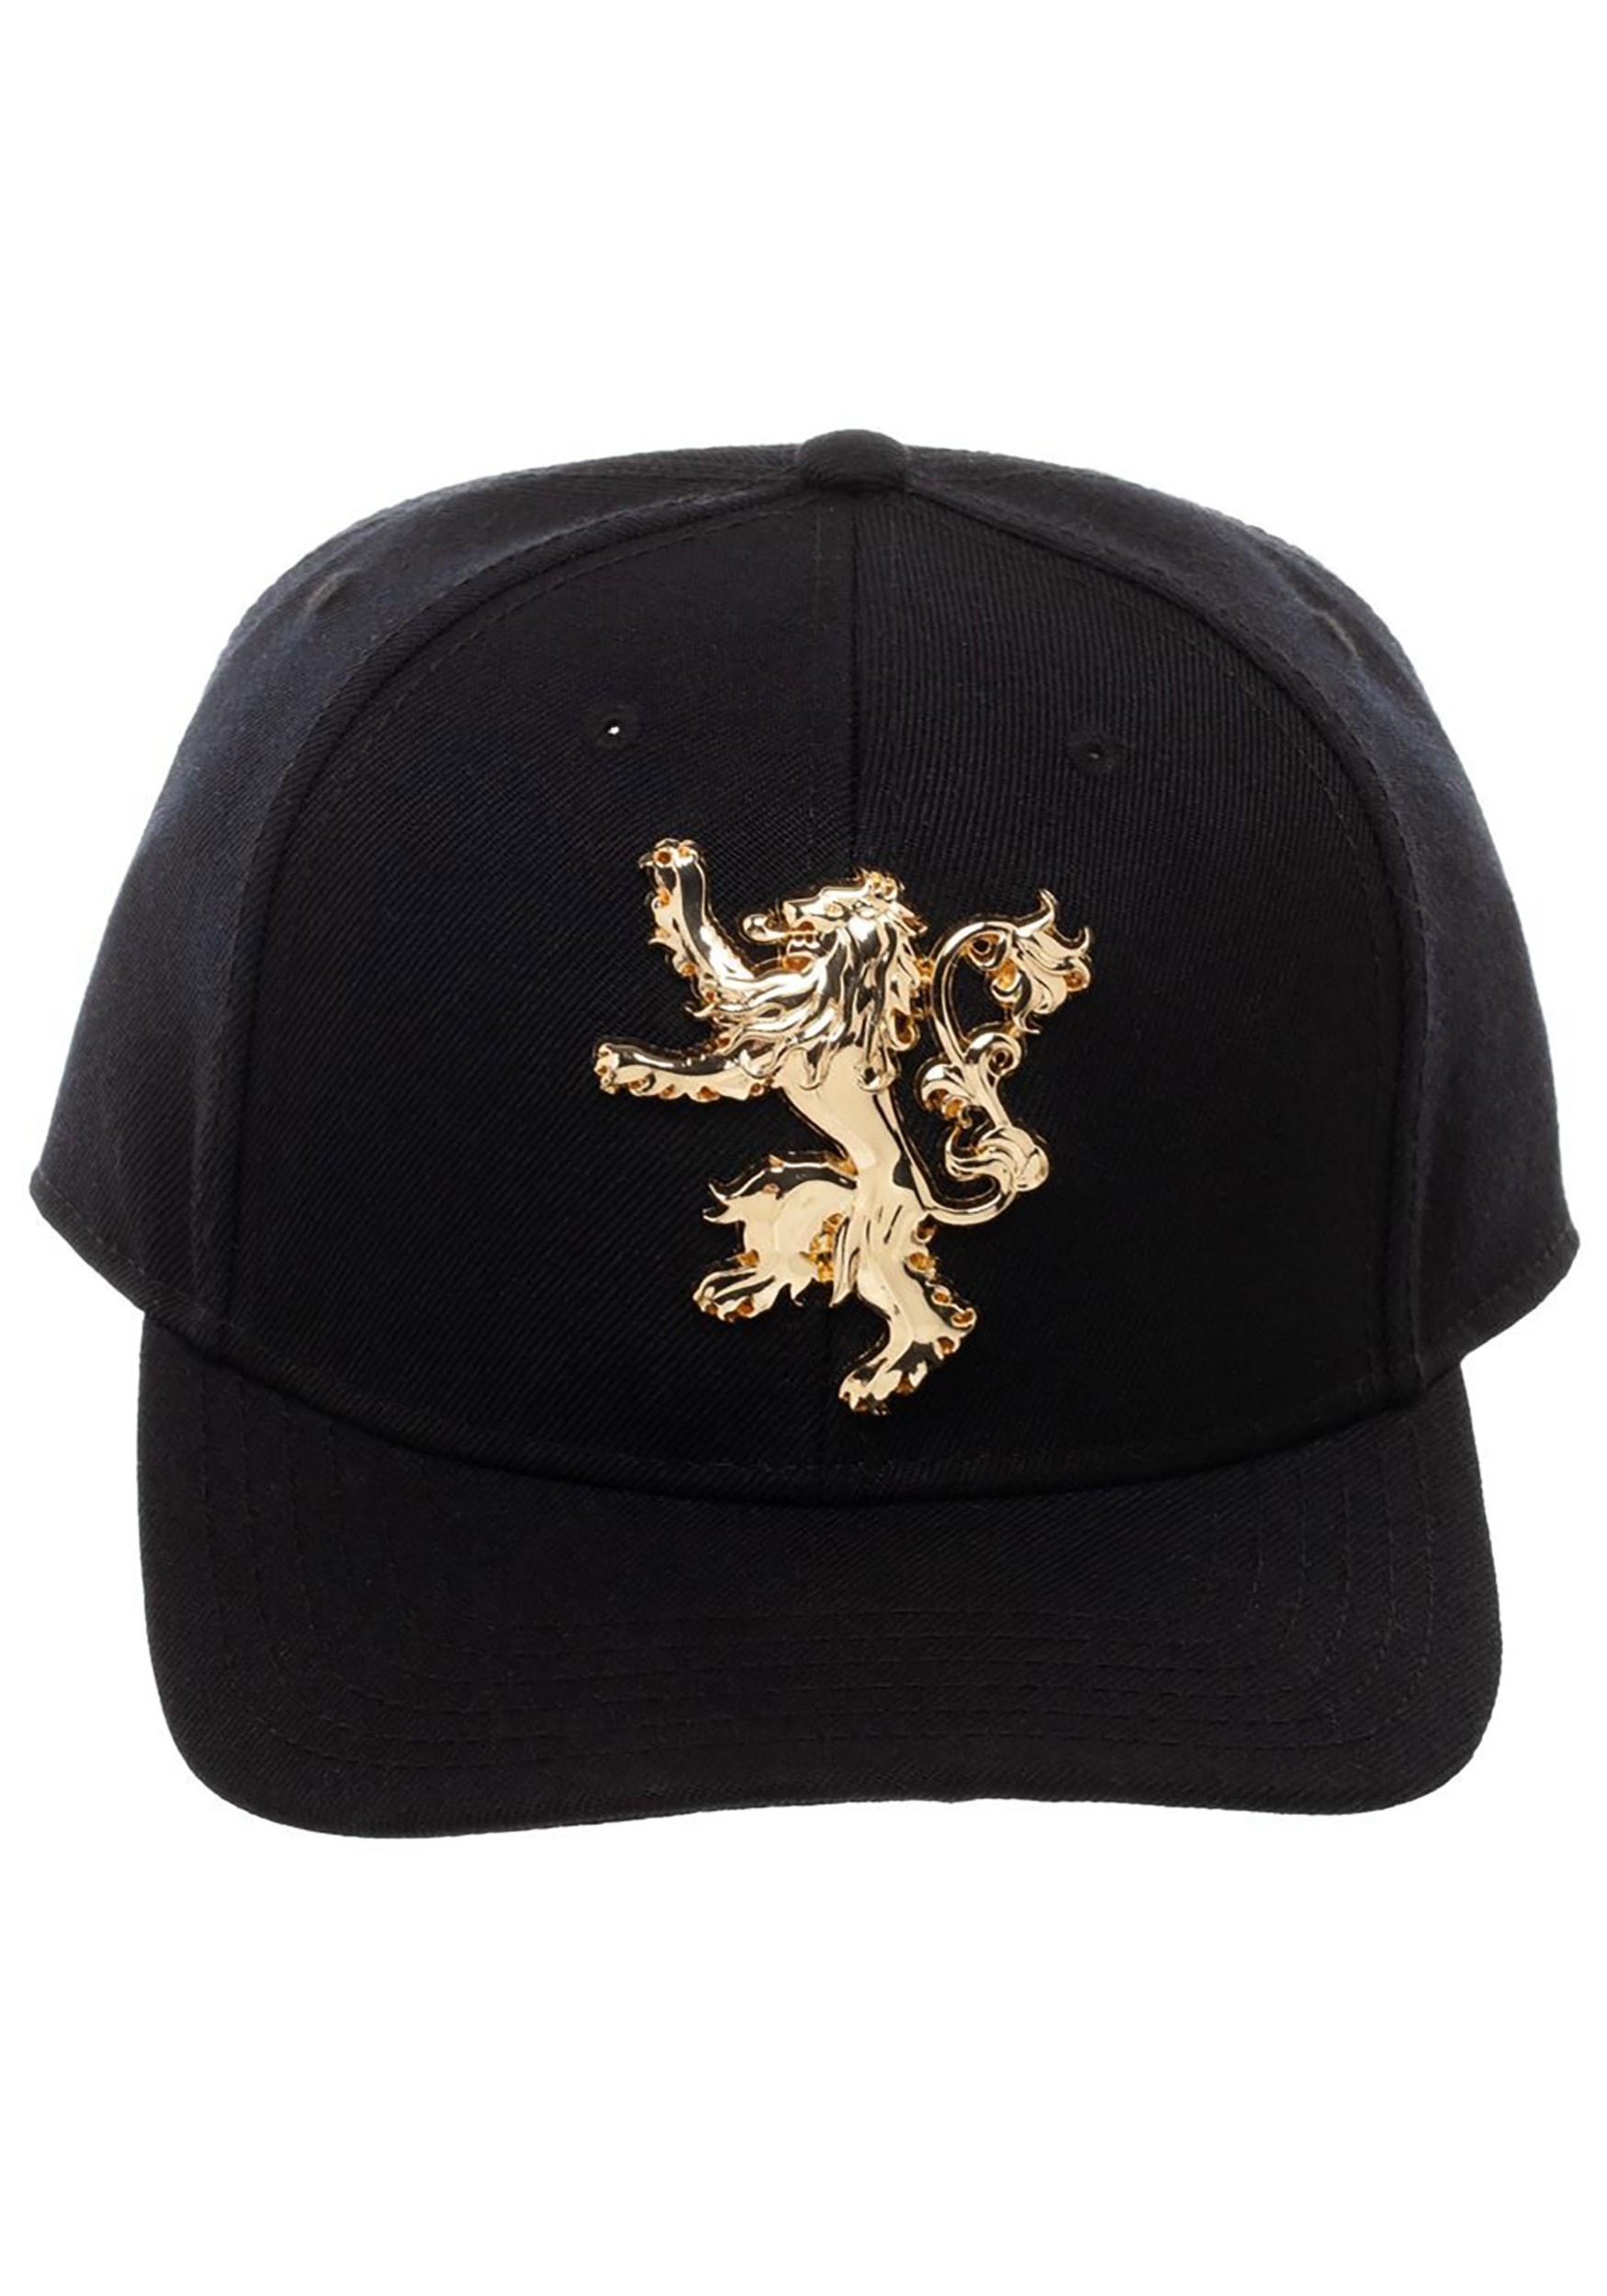 House Lannister Game Of Thrones Snapback